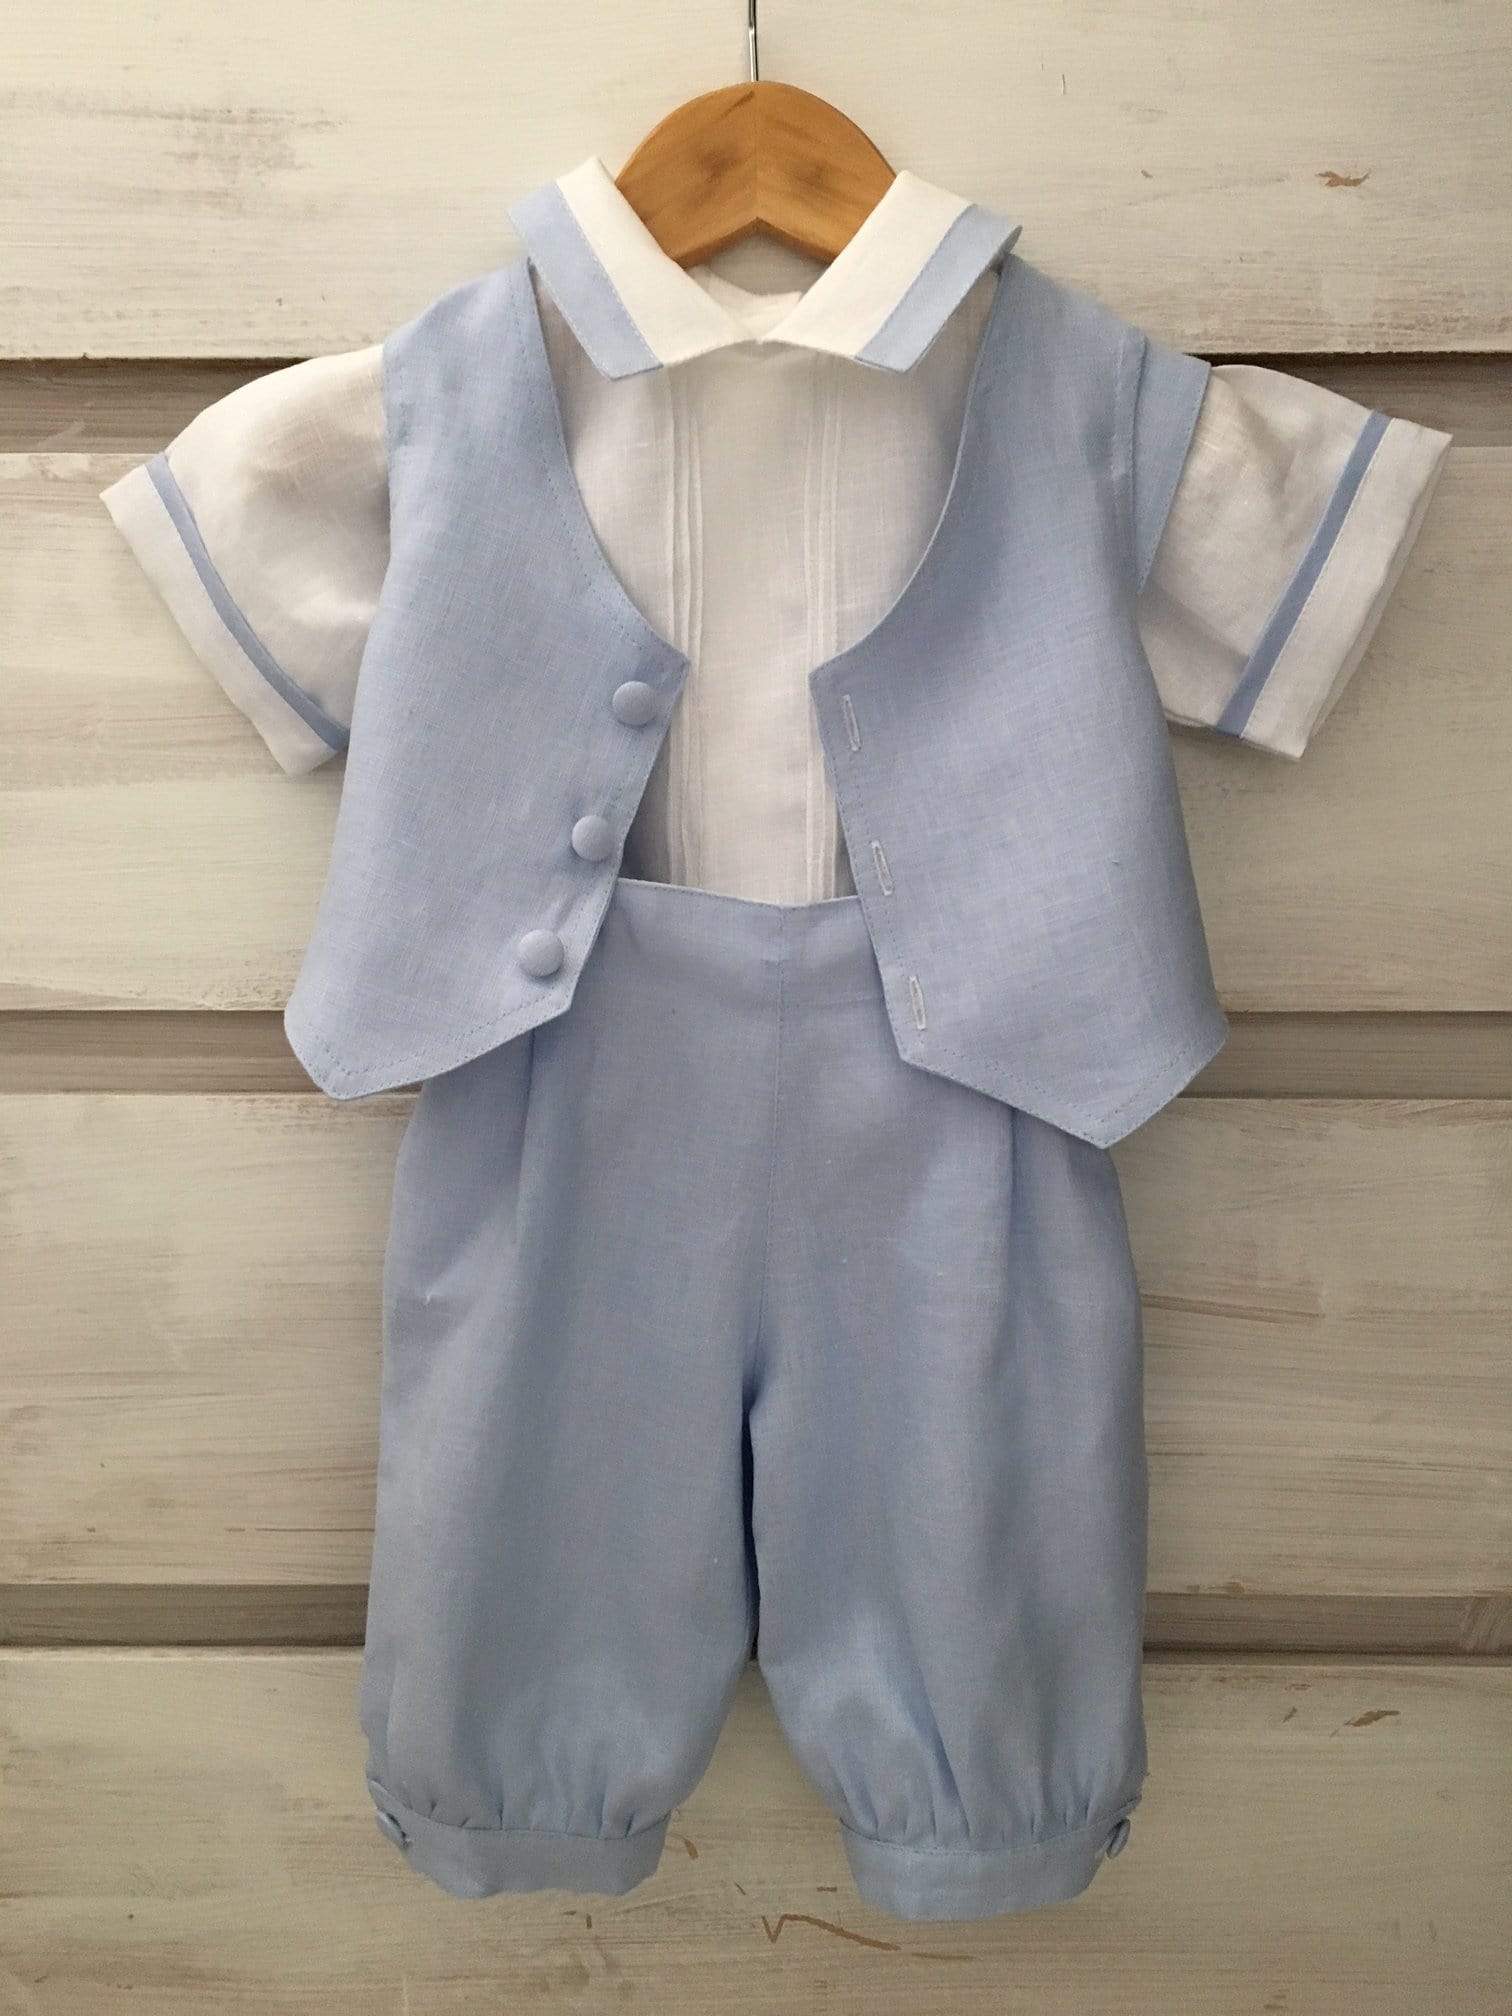 1966  Baby Boy Baptism / Christening  Outfit & Set